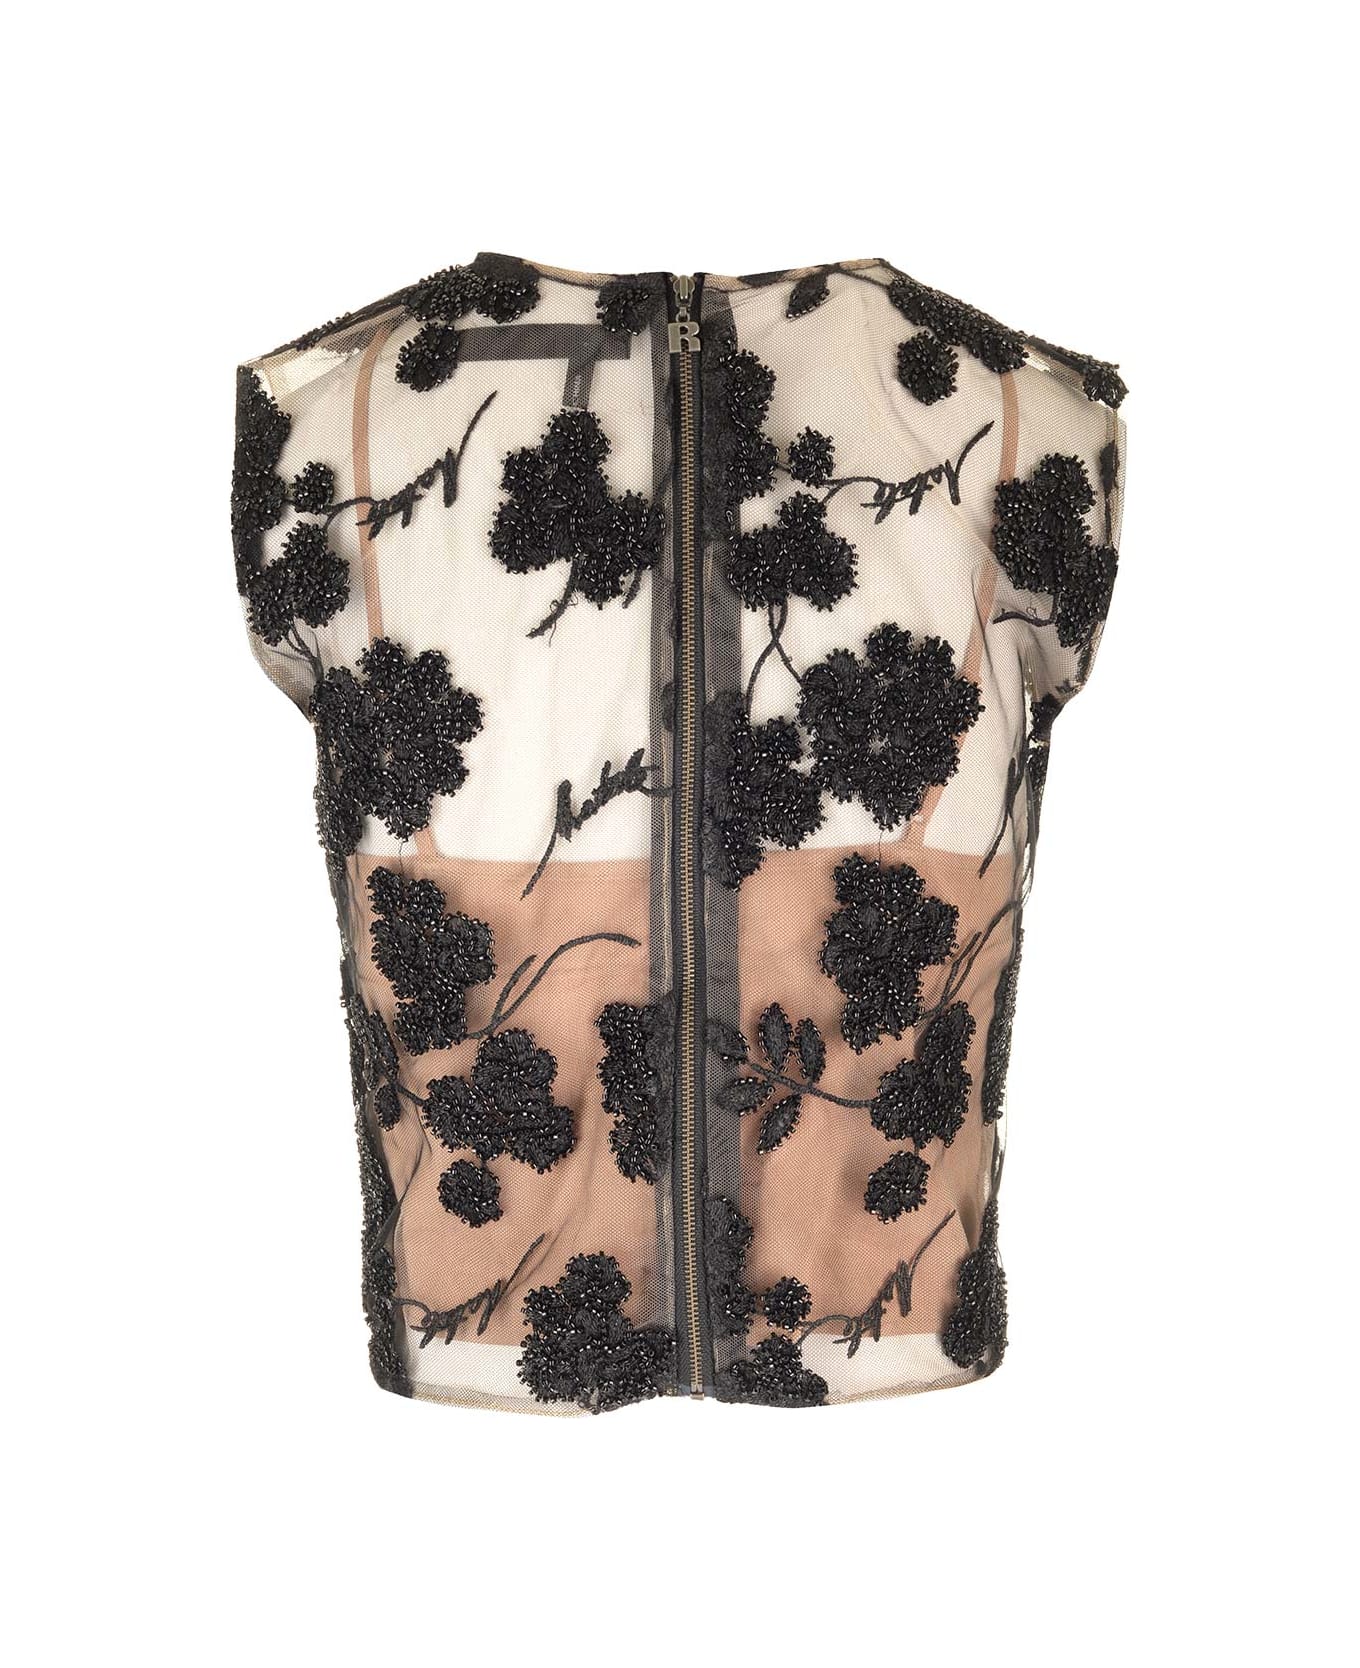 Rotate by Birger Christensen Black Floral Beaded Top - Black